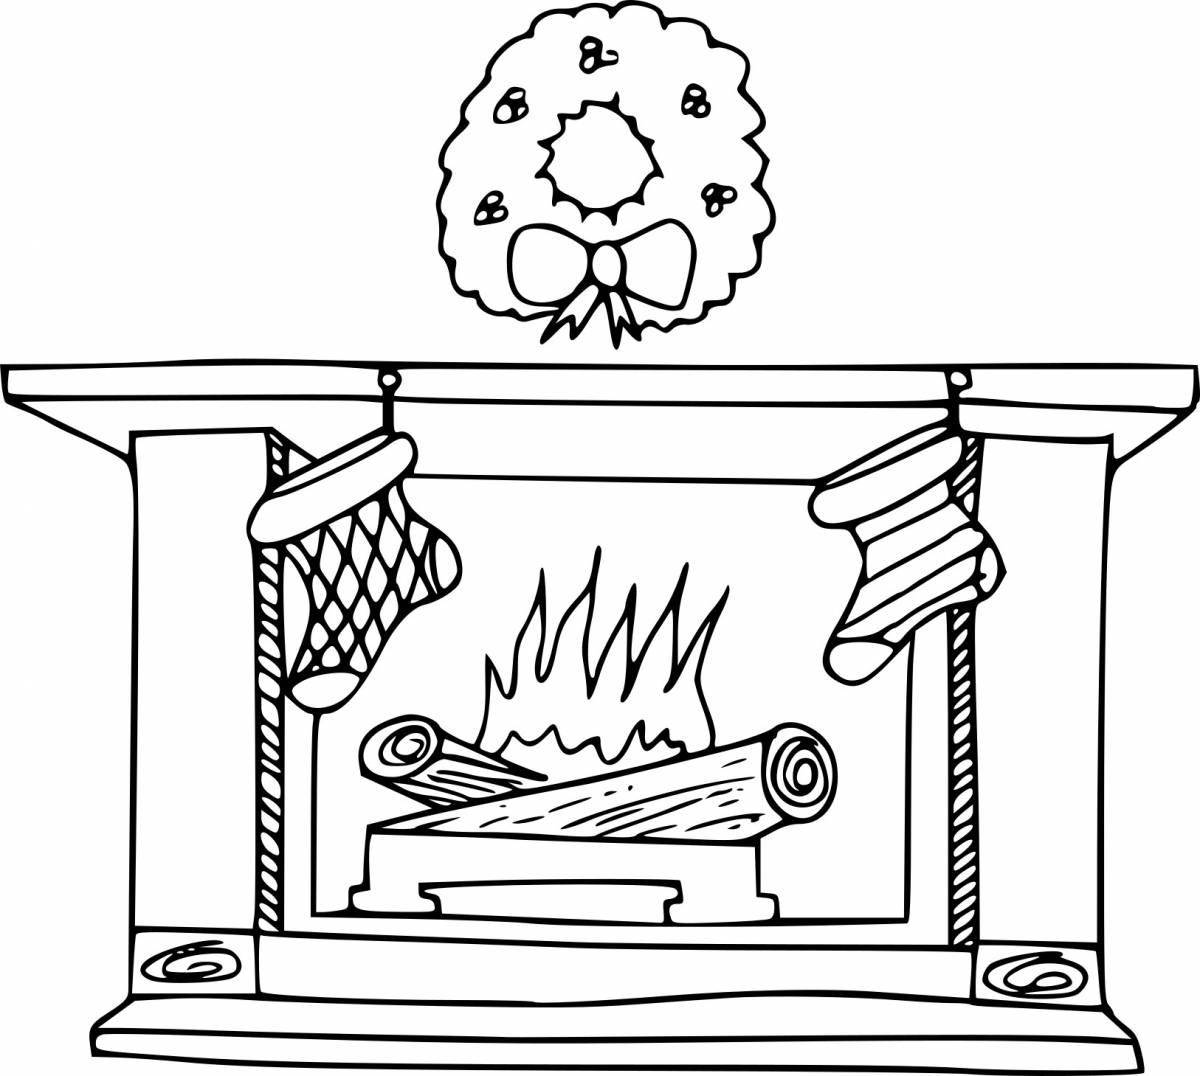 Colored oven coloring book for kids